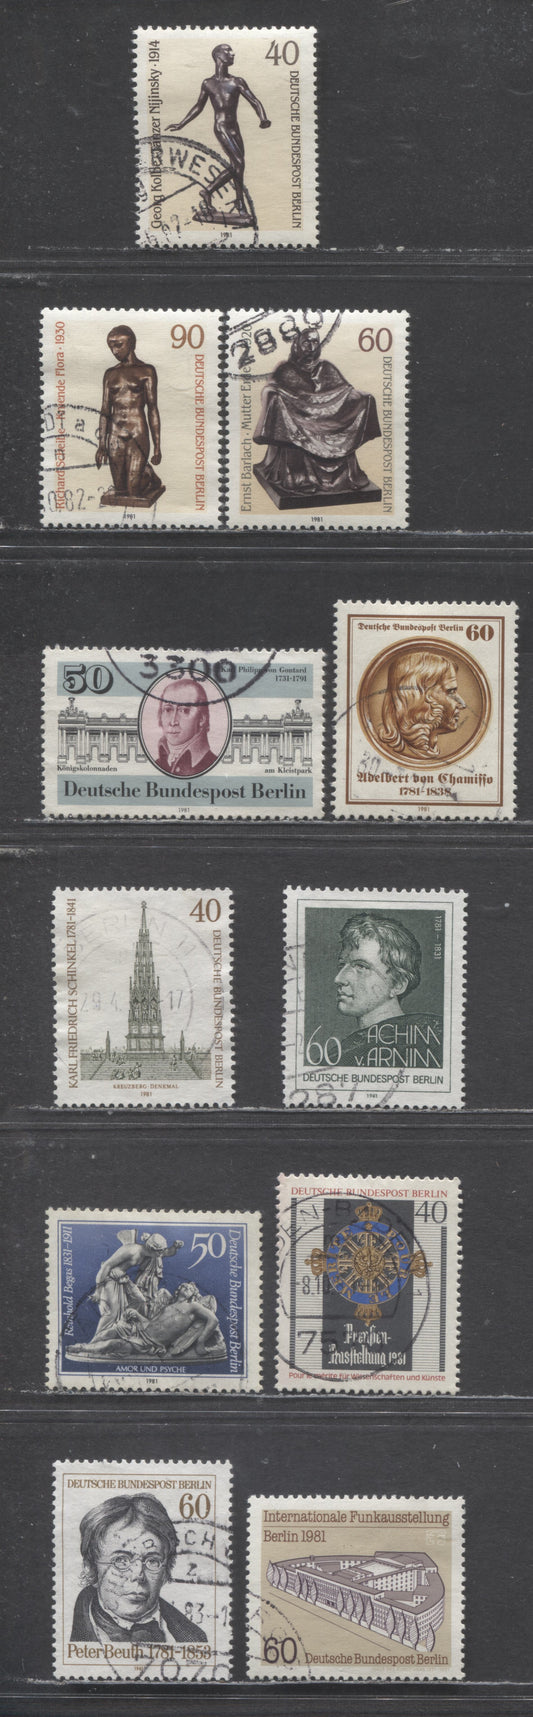 Berlin - Germany SC#9N460-9N470(Mi#637/657) 1981 Commemorative Issues (Von Gontard - Sculptures), 11 Very Fine Used Singles, Click on Listing to See ALL Pictures, Estimated Value $9 USD